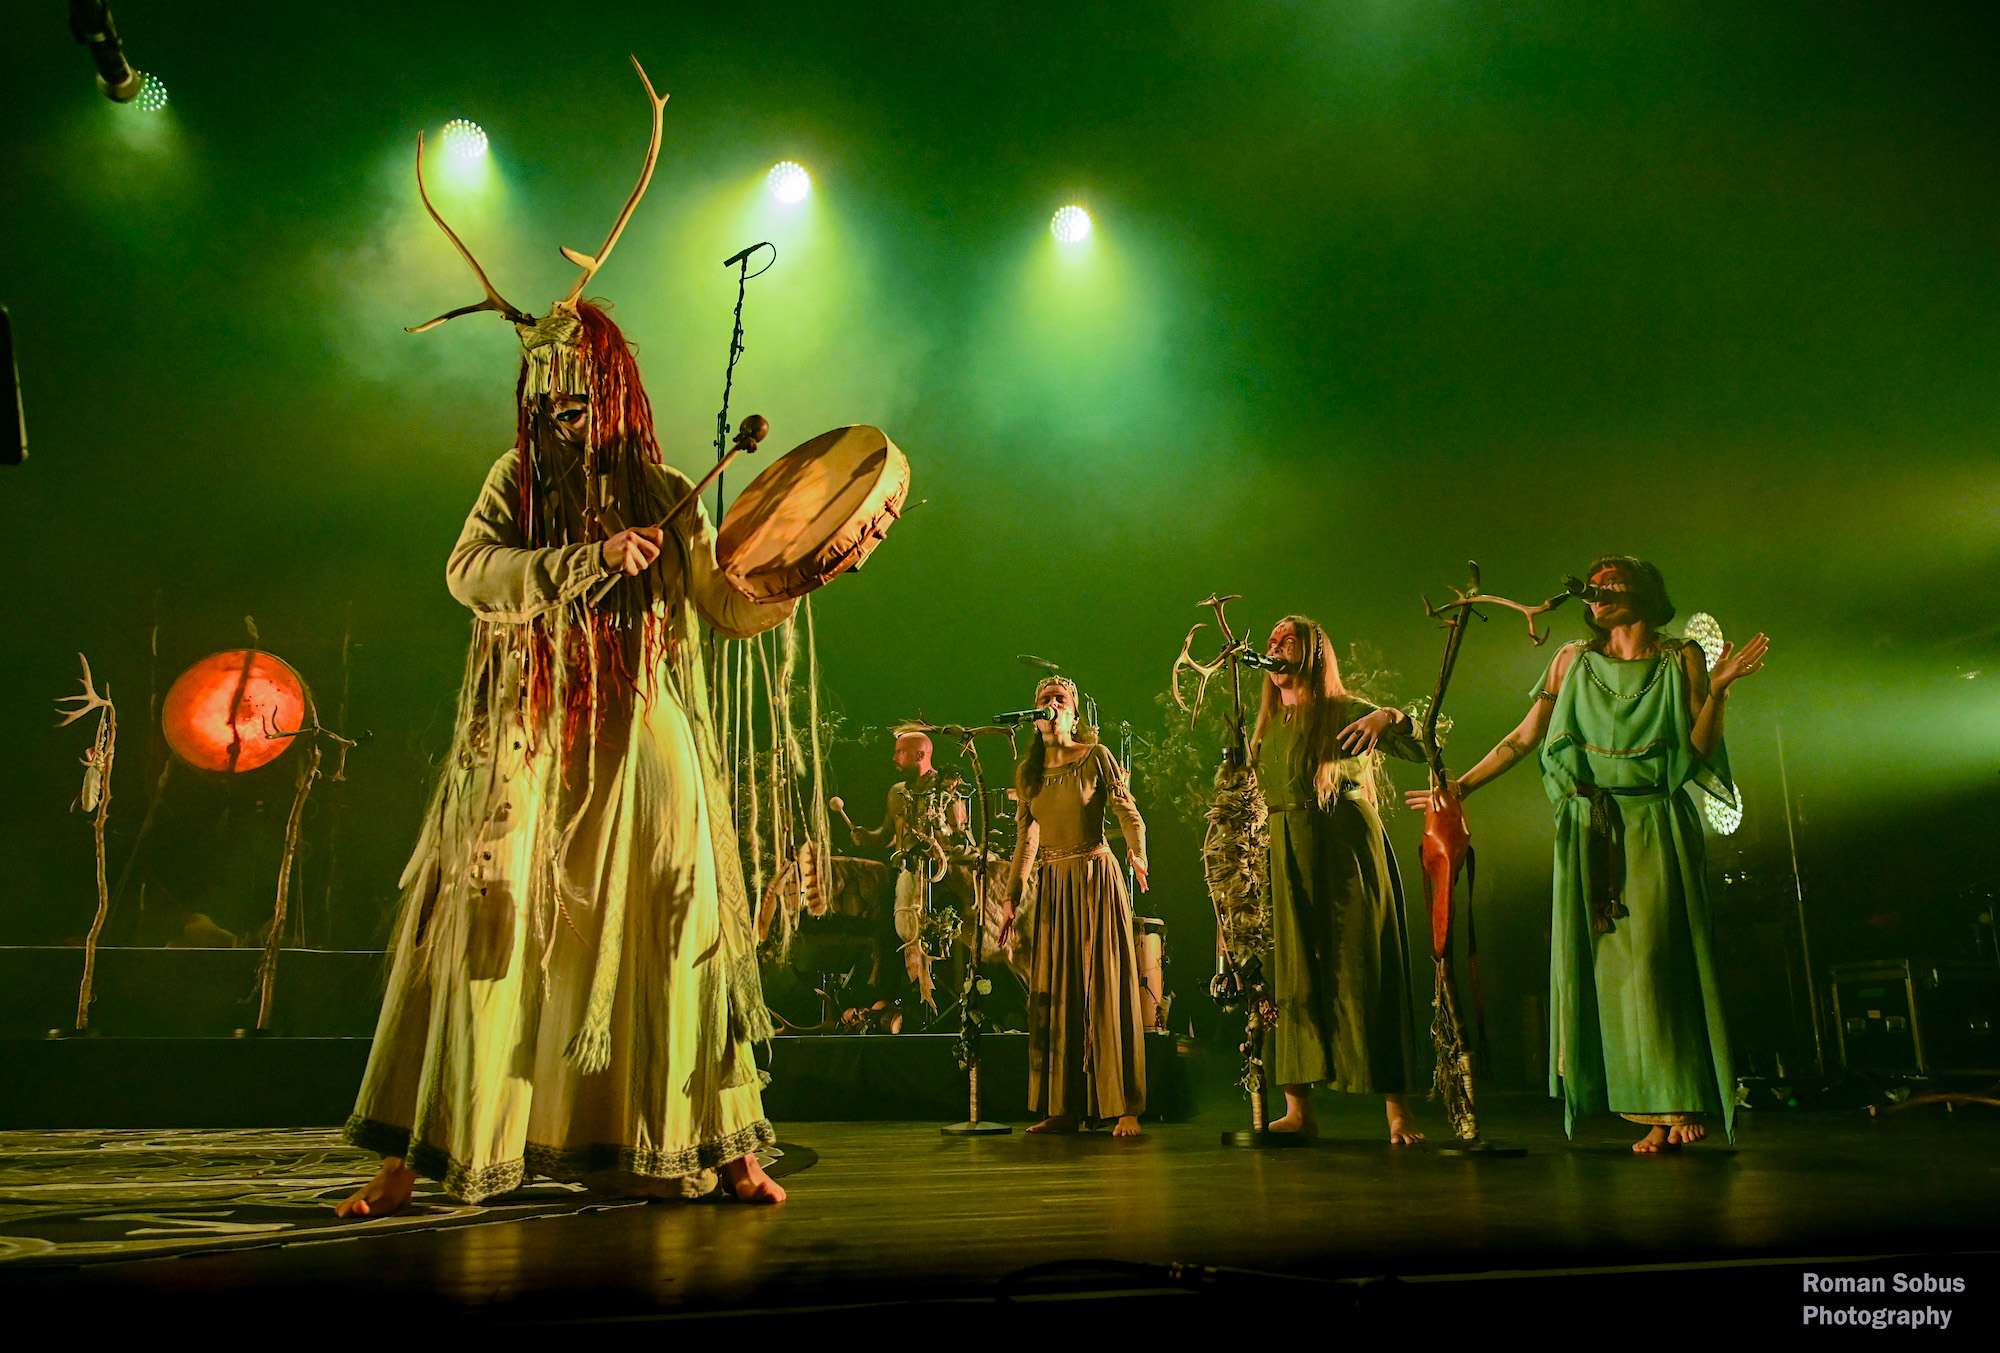 Heilung Live at Radius [GALLERY] 2